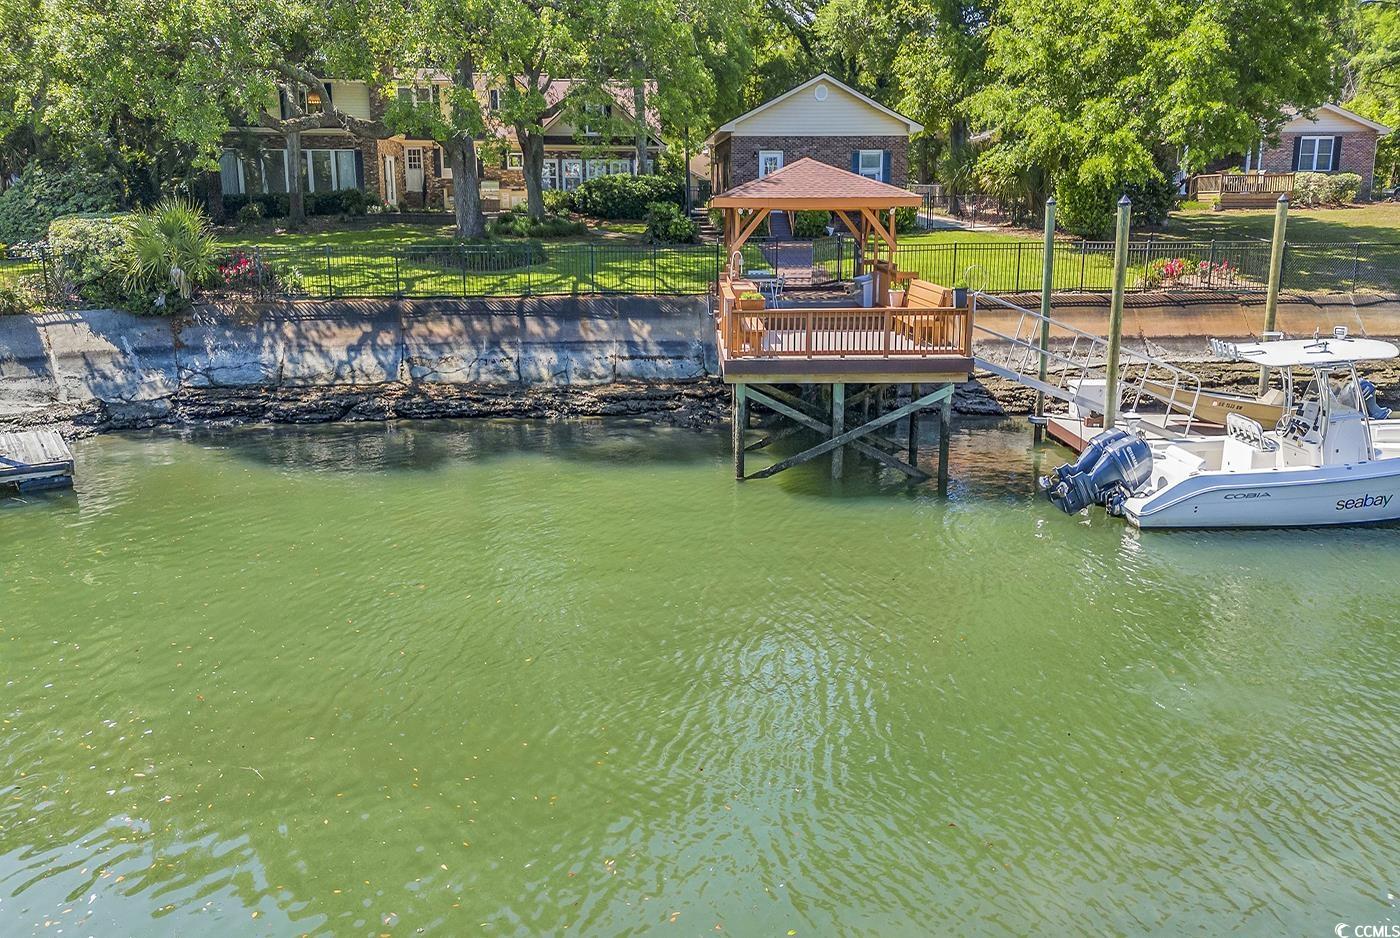 this is a highly desirable waterfront home in the fabulous neighborhood of mt. gilead. one of the largest and highest elevation lots in the area featuring gorgeous live oak trees. property has brand new large covered lumberock stationary dock with fish cleaning station and also a floating dock with commercial grade dock boxes. dock includes winch for storage of small boat. beautiful view of the deep water protected canal that is a short boat ride to the inlet and atlantic ocean. the home boasts a renovated kitchen, 4 bedrooms/ 4 1/2 bathrooms, hearth room with fireplace, theatre room with projection screen tv, game room, large carolina room with expansive views of the waterfront, and oversized detached two car garage. the theatre room can be converted to a fifth bedroom.  you will want to be outside all of the time with this beautiful backyard overlooking the water. the large outdoor patio boasts an outdoor grilling area station with a fire magic grill and seating area with a custom gas fire pit. of course, with your boat in your backyard, it's easy to take an evening cruise to have dinner on the marshwalk of murrells inlet, 20 minutes to the ocean for deep-sea fishing or relax on beach at the local's favorite beach called "the point". fully-fenced backyard makes it easy for your pups to enjoy all of the outdoor amenities, as well.